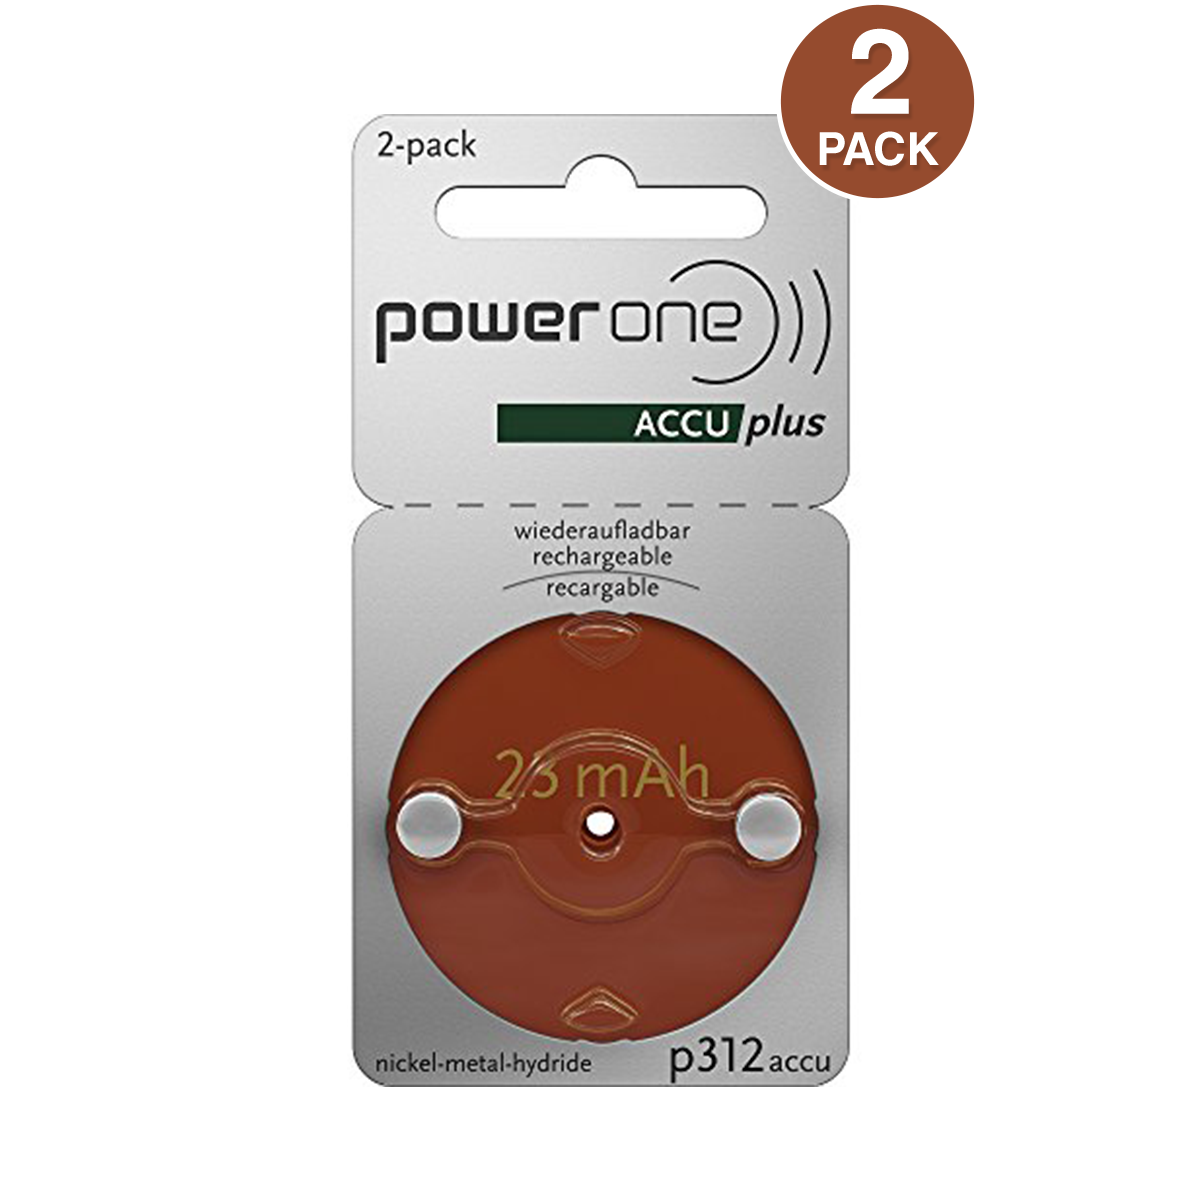 Power One Accu Plus Size 312 P312 Ni-mh Rechargeable Hearing Aid Batteries